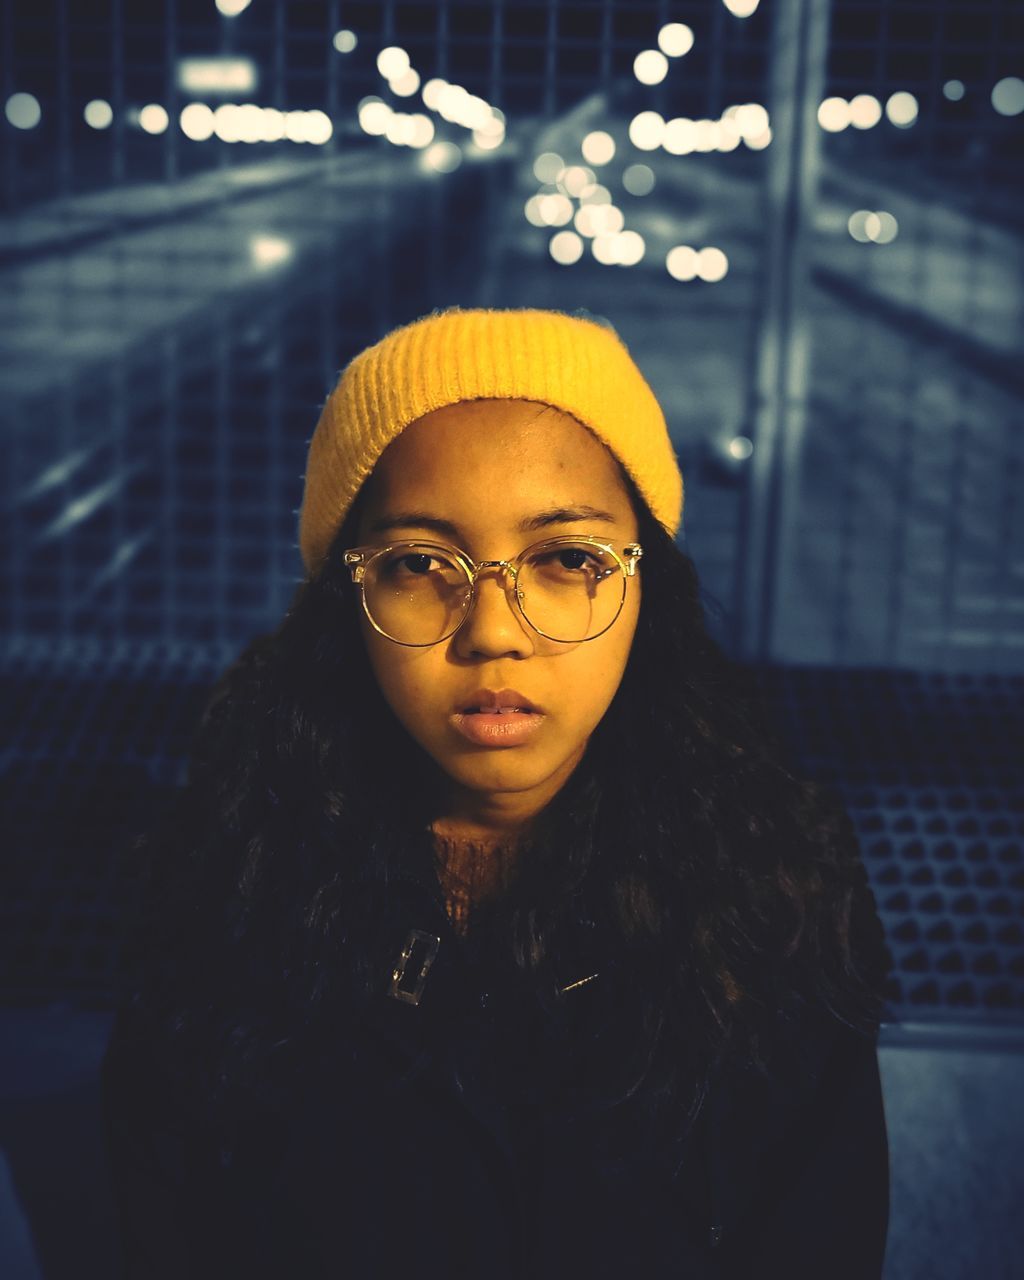 one person, glasses, eyeglasses, front view, real people, leisure activity, lifestyles, portrait, clothing, illuminated, looking at camera, night, indoors, focus on foreground, young women, waist up, women, hat, young adult, hairstyle, warm clothing, scarf